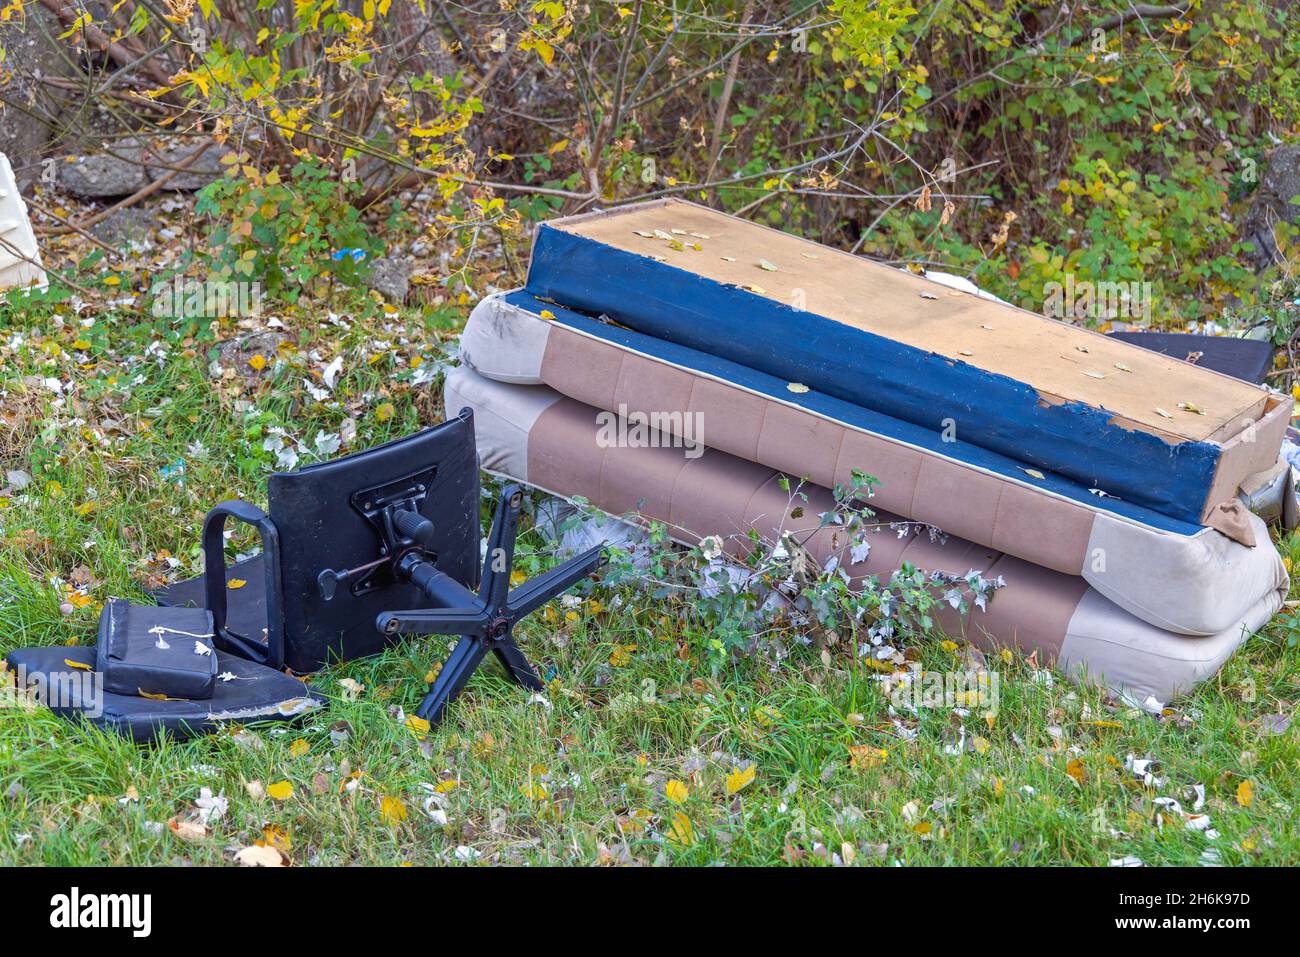 Illegal Furniture Dumping Site in Nature Environment Problem Stock Photo